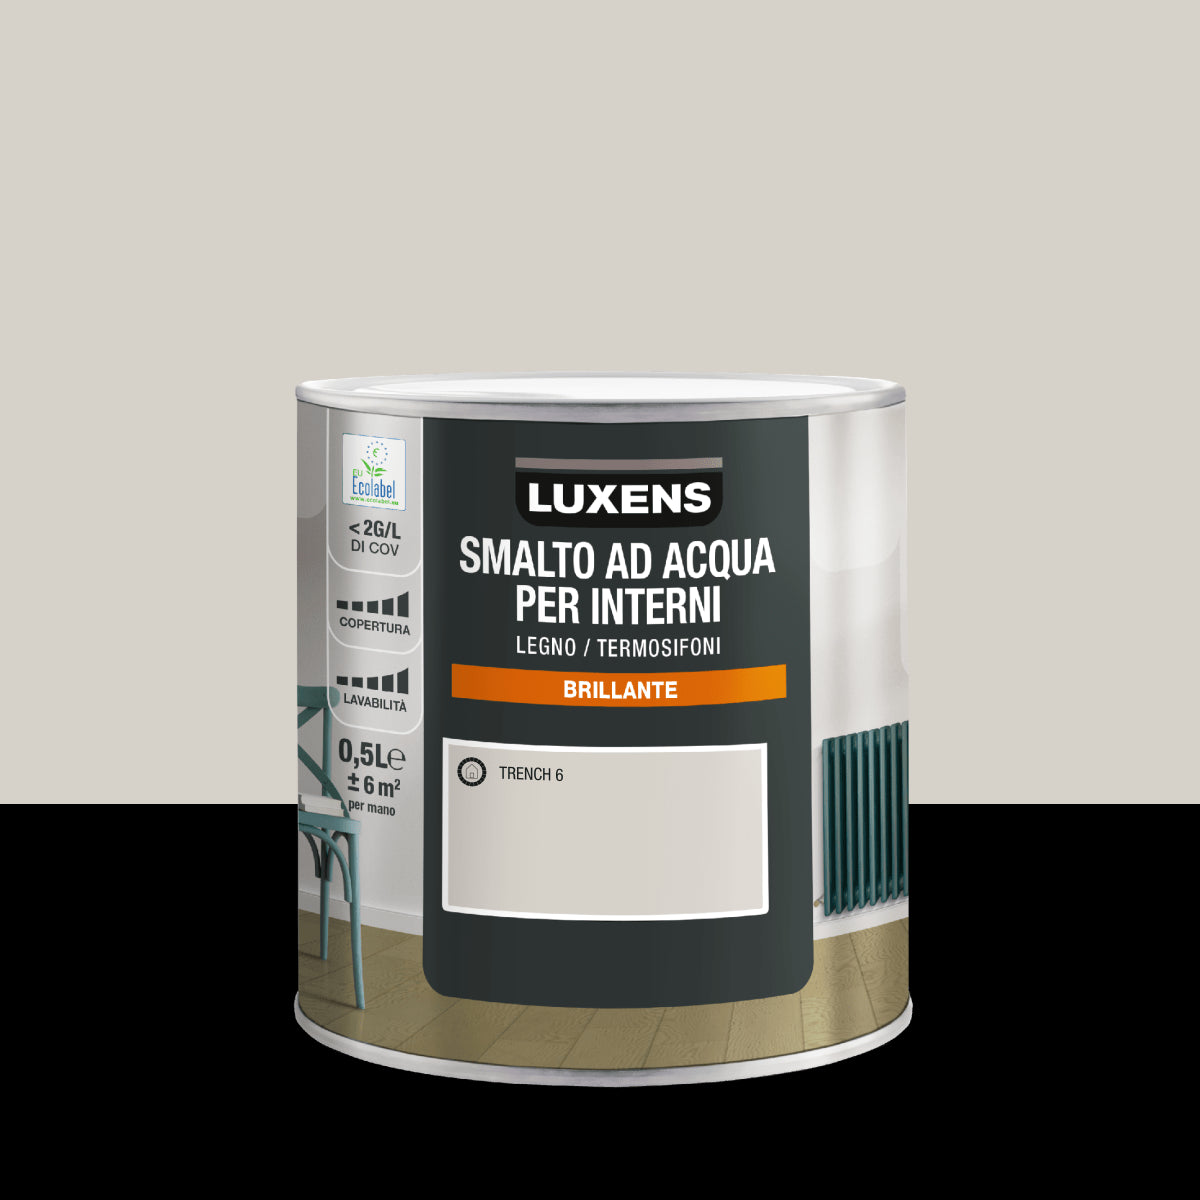 WATER-BASED INTERIOR ENAMEL TRENCH 6 BRILLIANT LUXENS 500ML